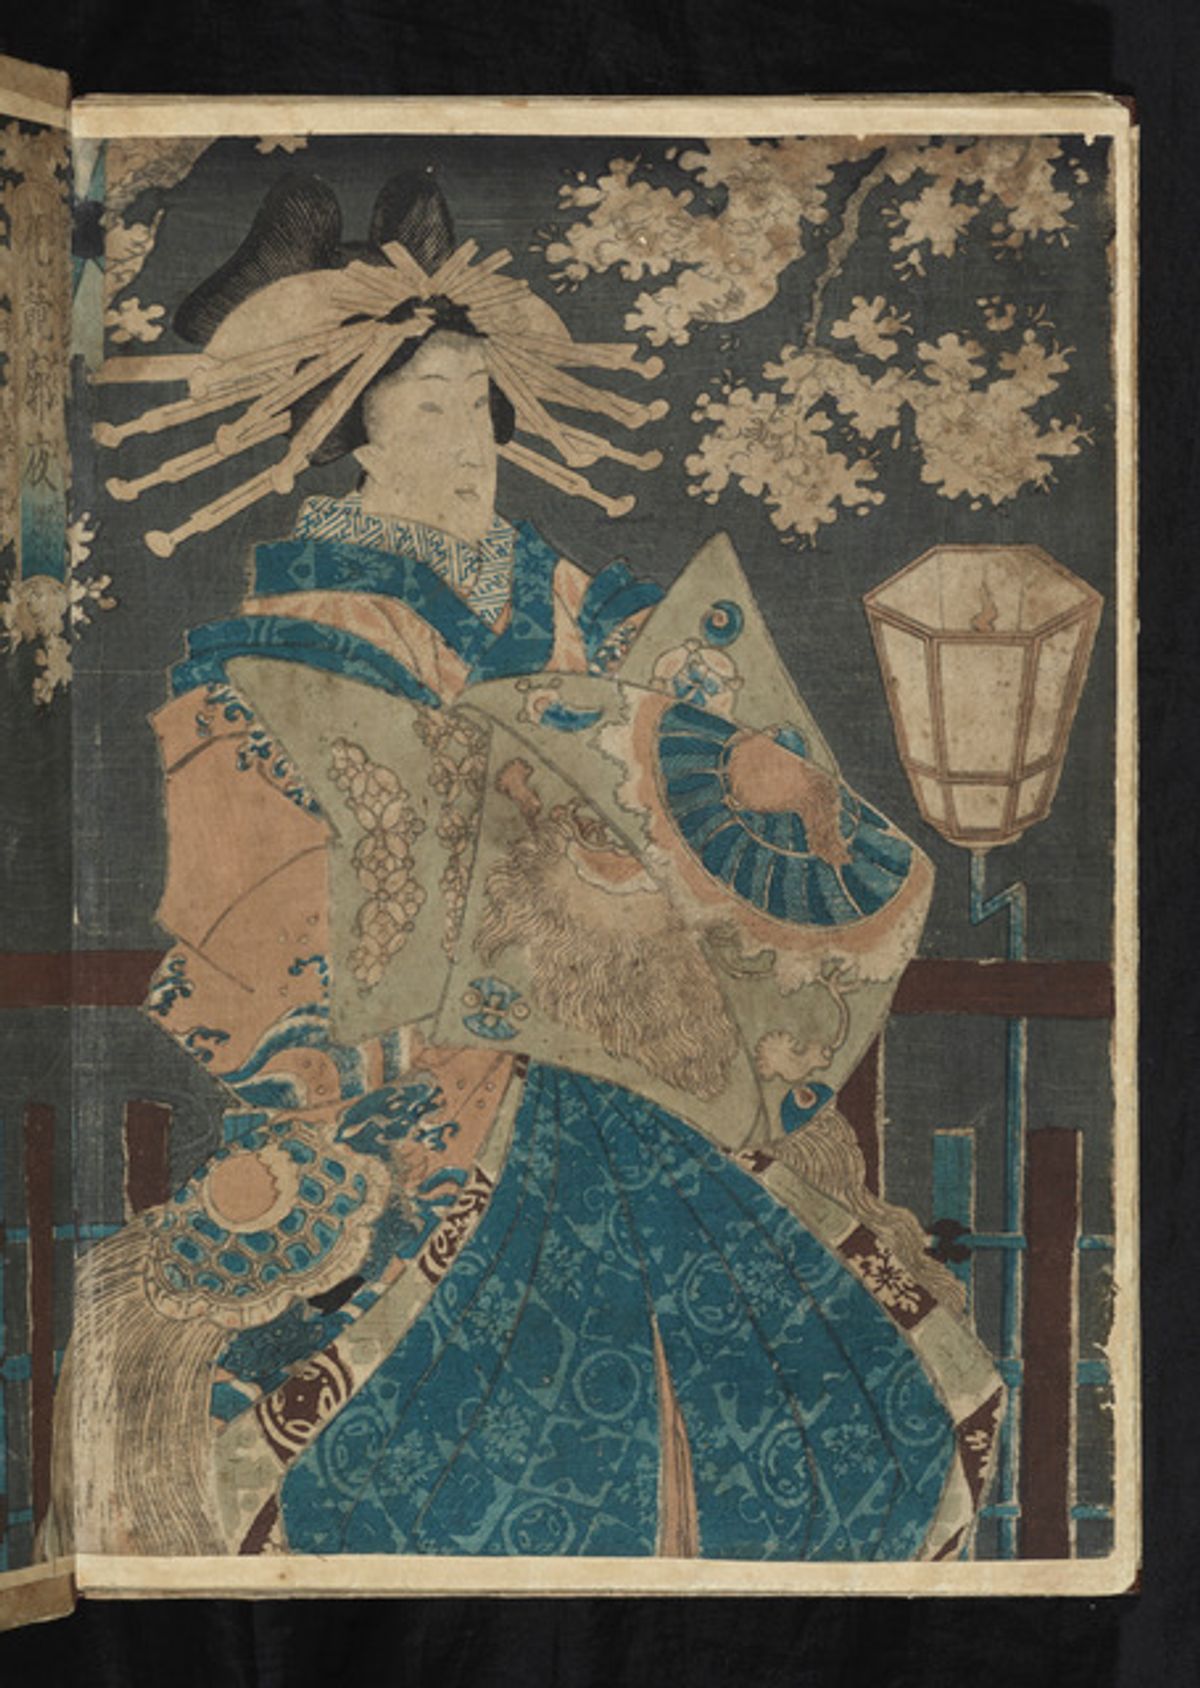 Gauguin’s copy of Utagawa Kunisada, A Courtesan, from the series "Night Cherry Blossoms in the Pleasure Quarter” (1858) Courtesy of Courtauld, London